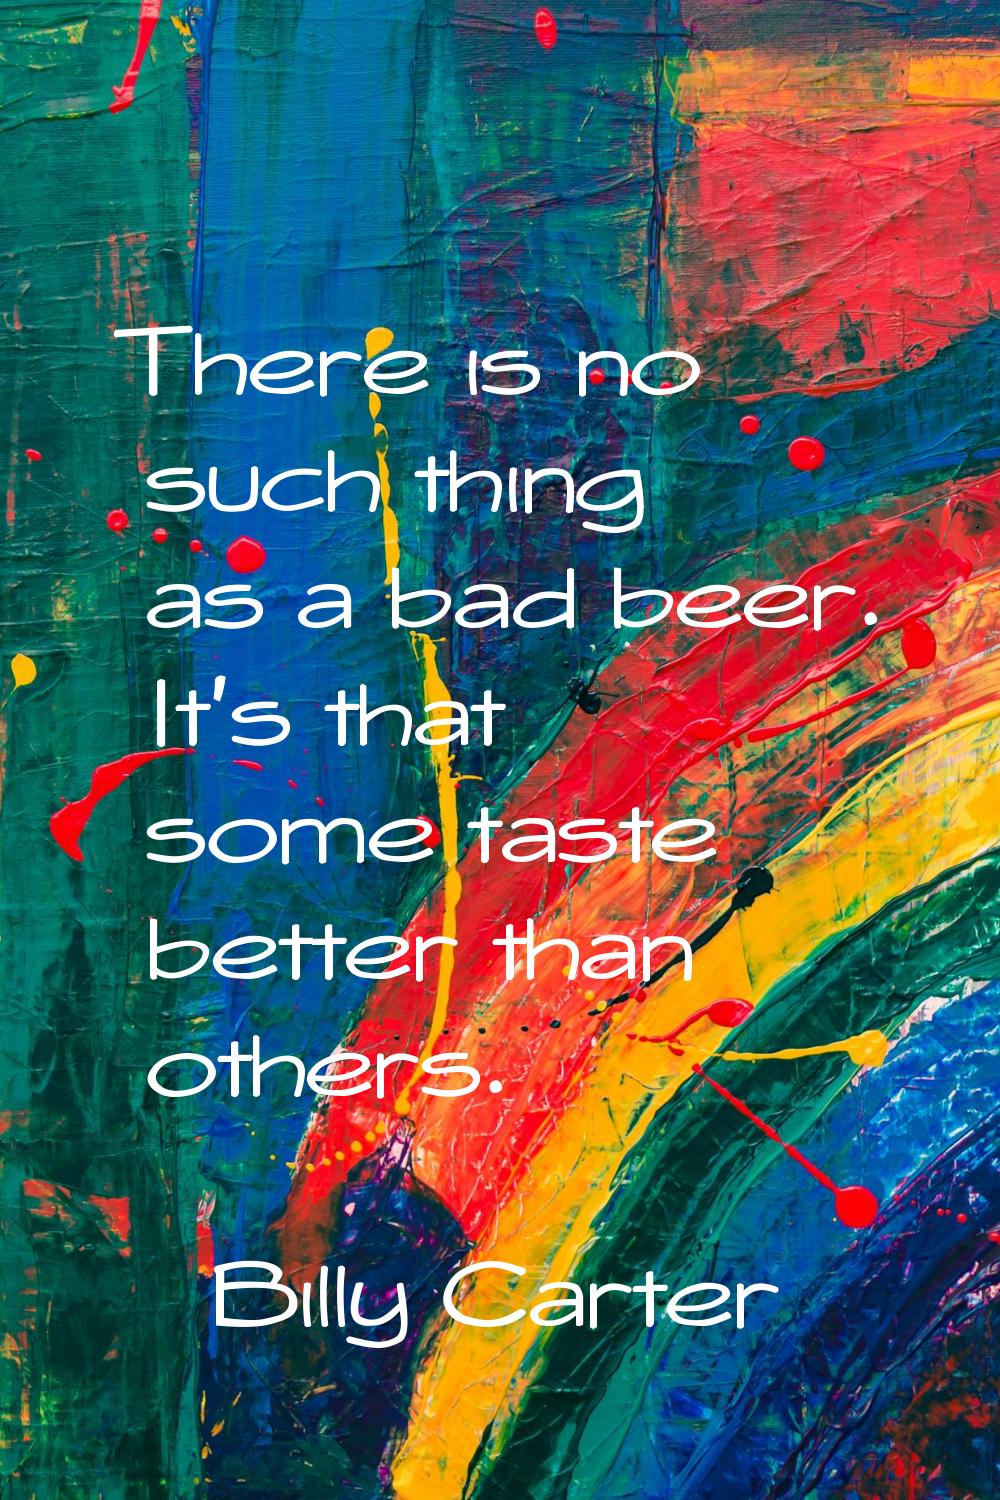 There is no such thing as a bad beer. It's that some taste better than others.